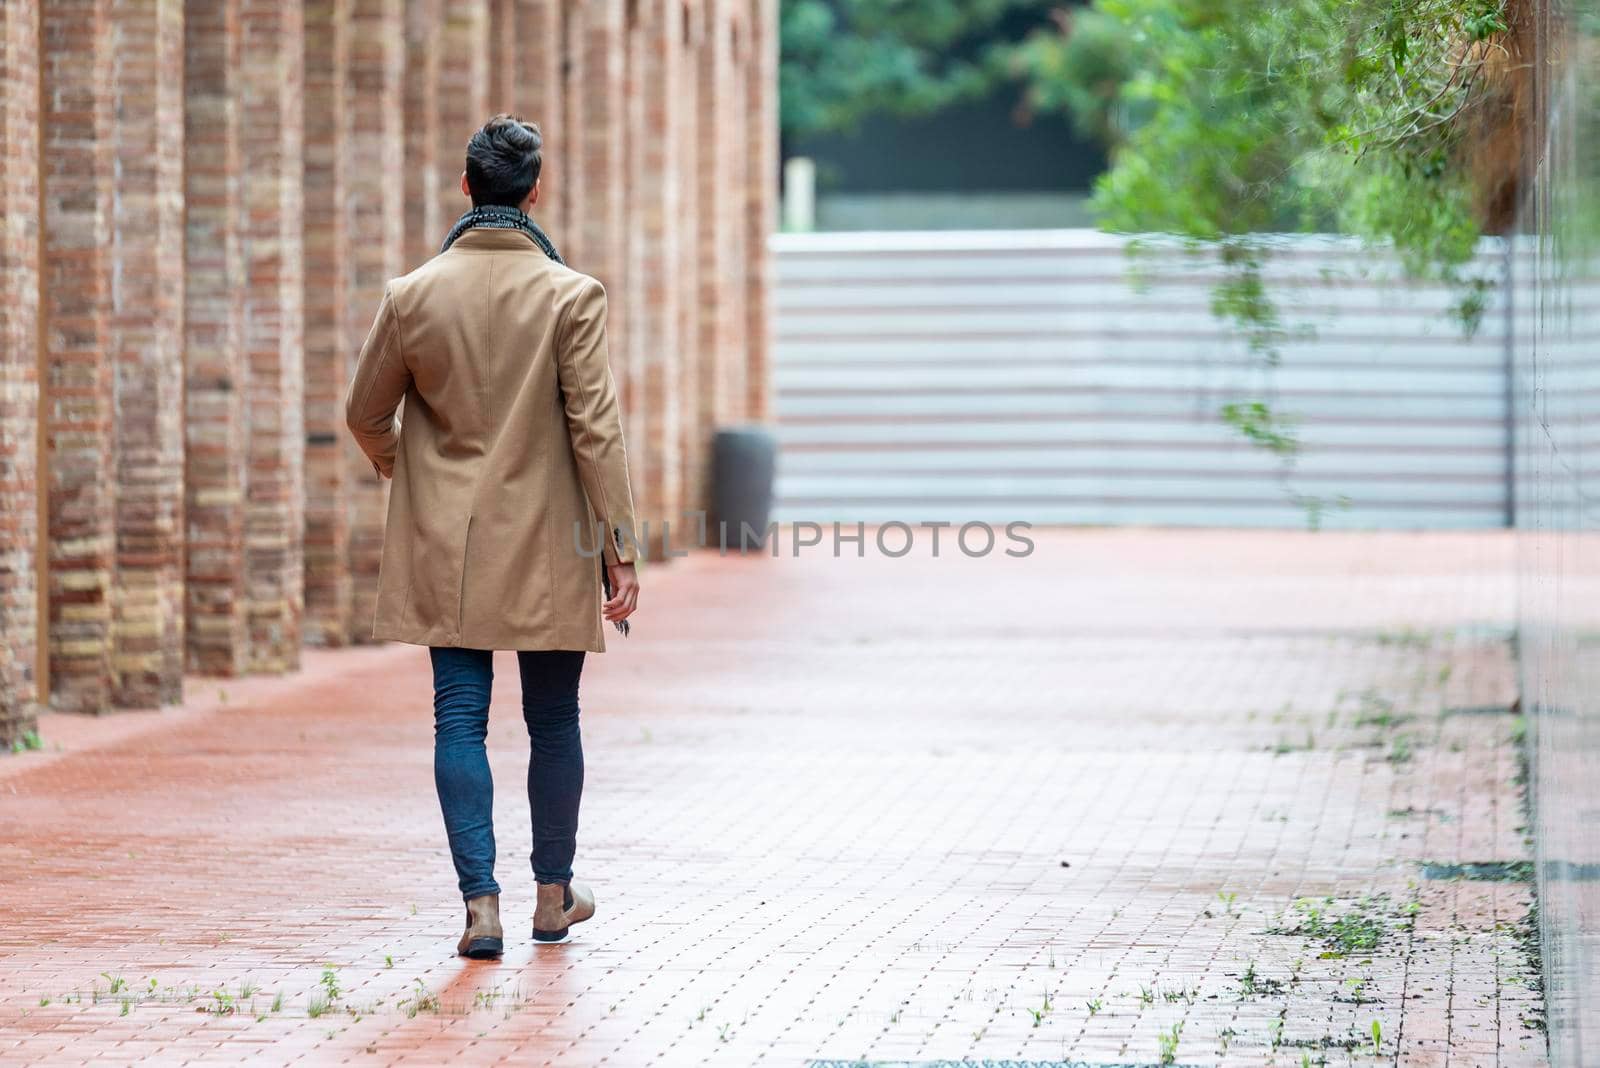 Handsome young man wearing winter clothes walking on the city. Street photo concept.